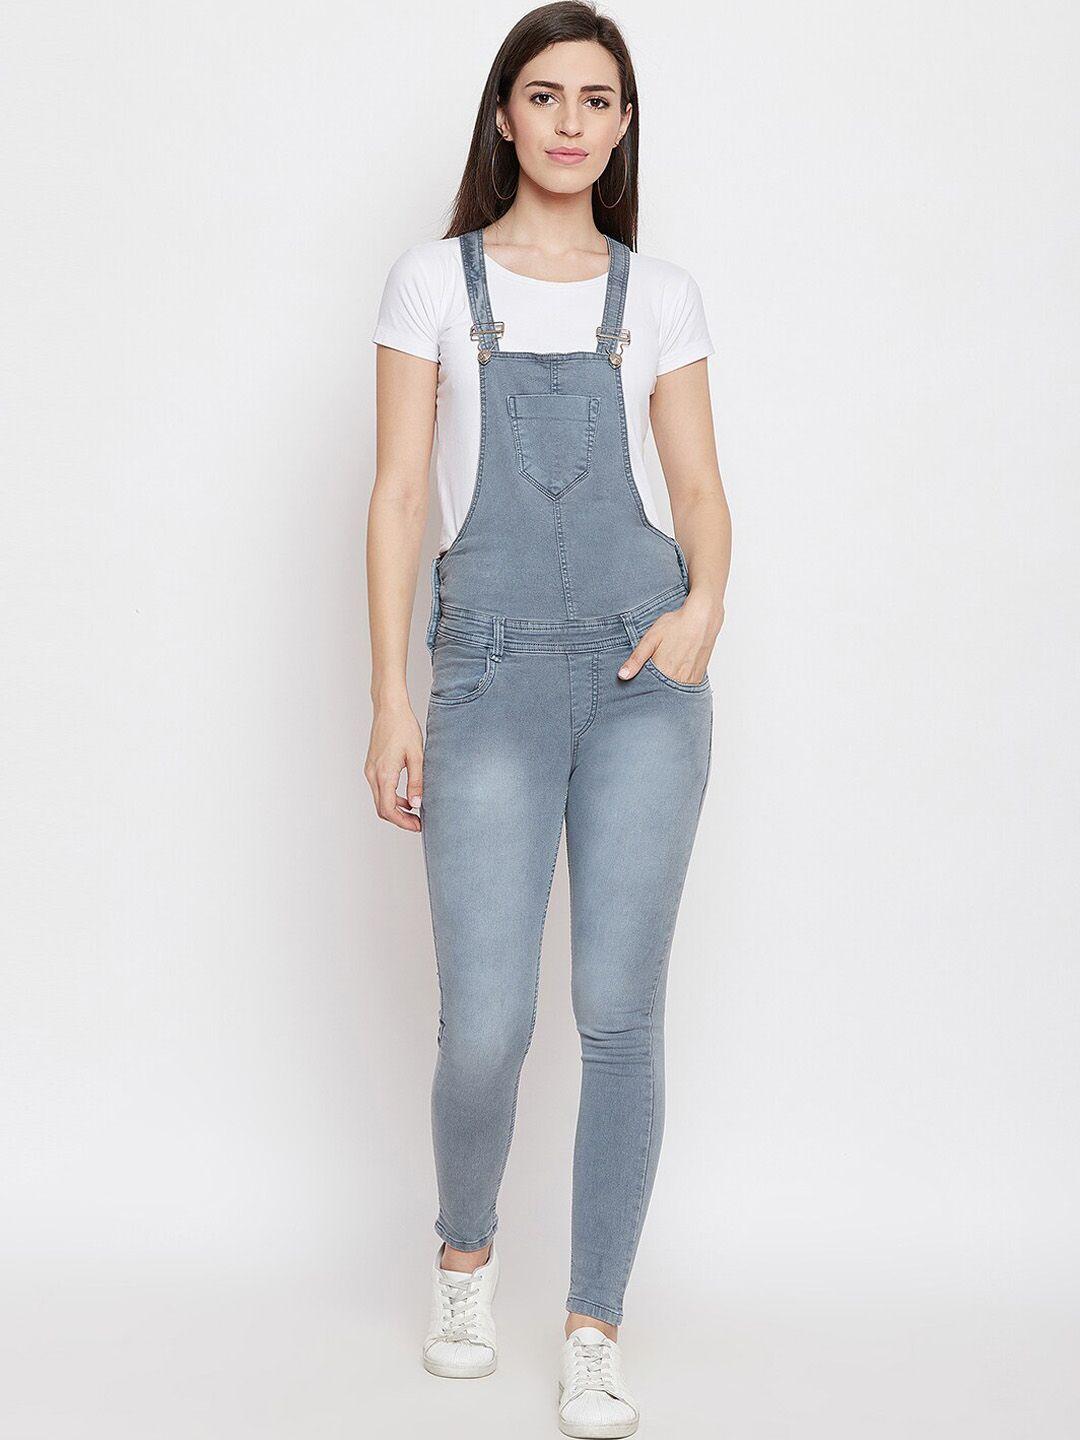 nifty sretchable skinny fit denim dungarees